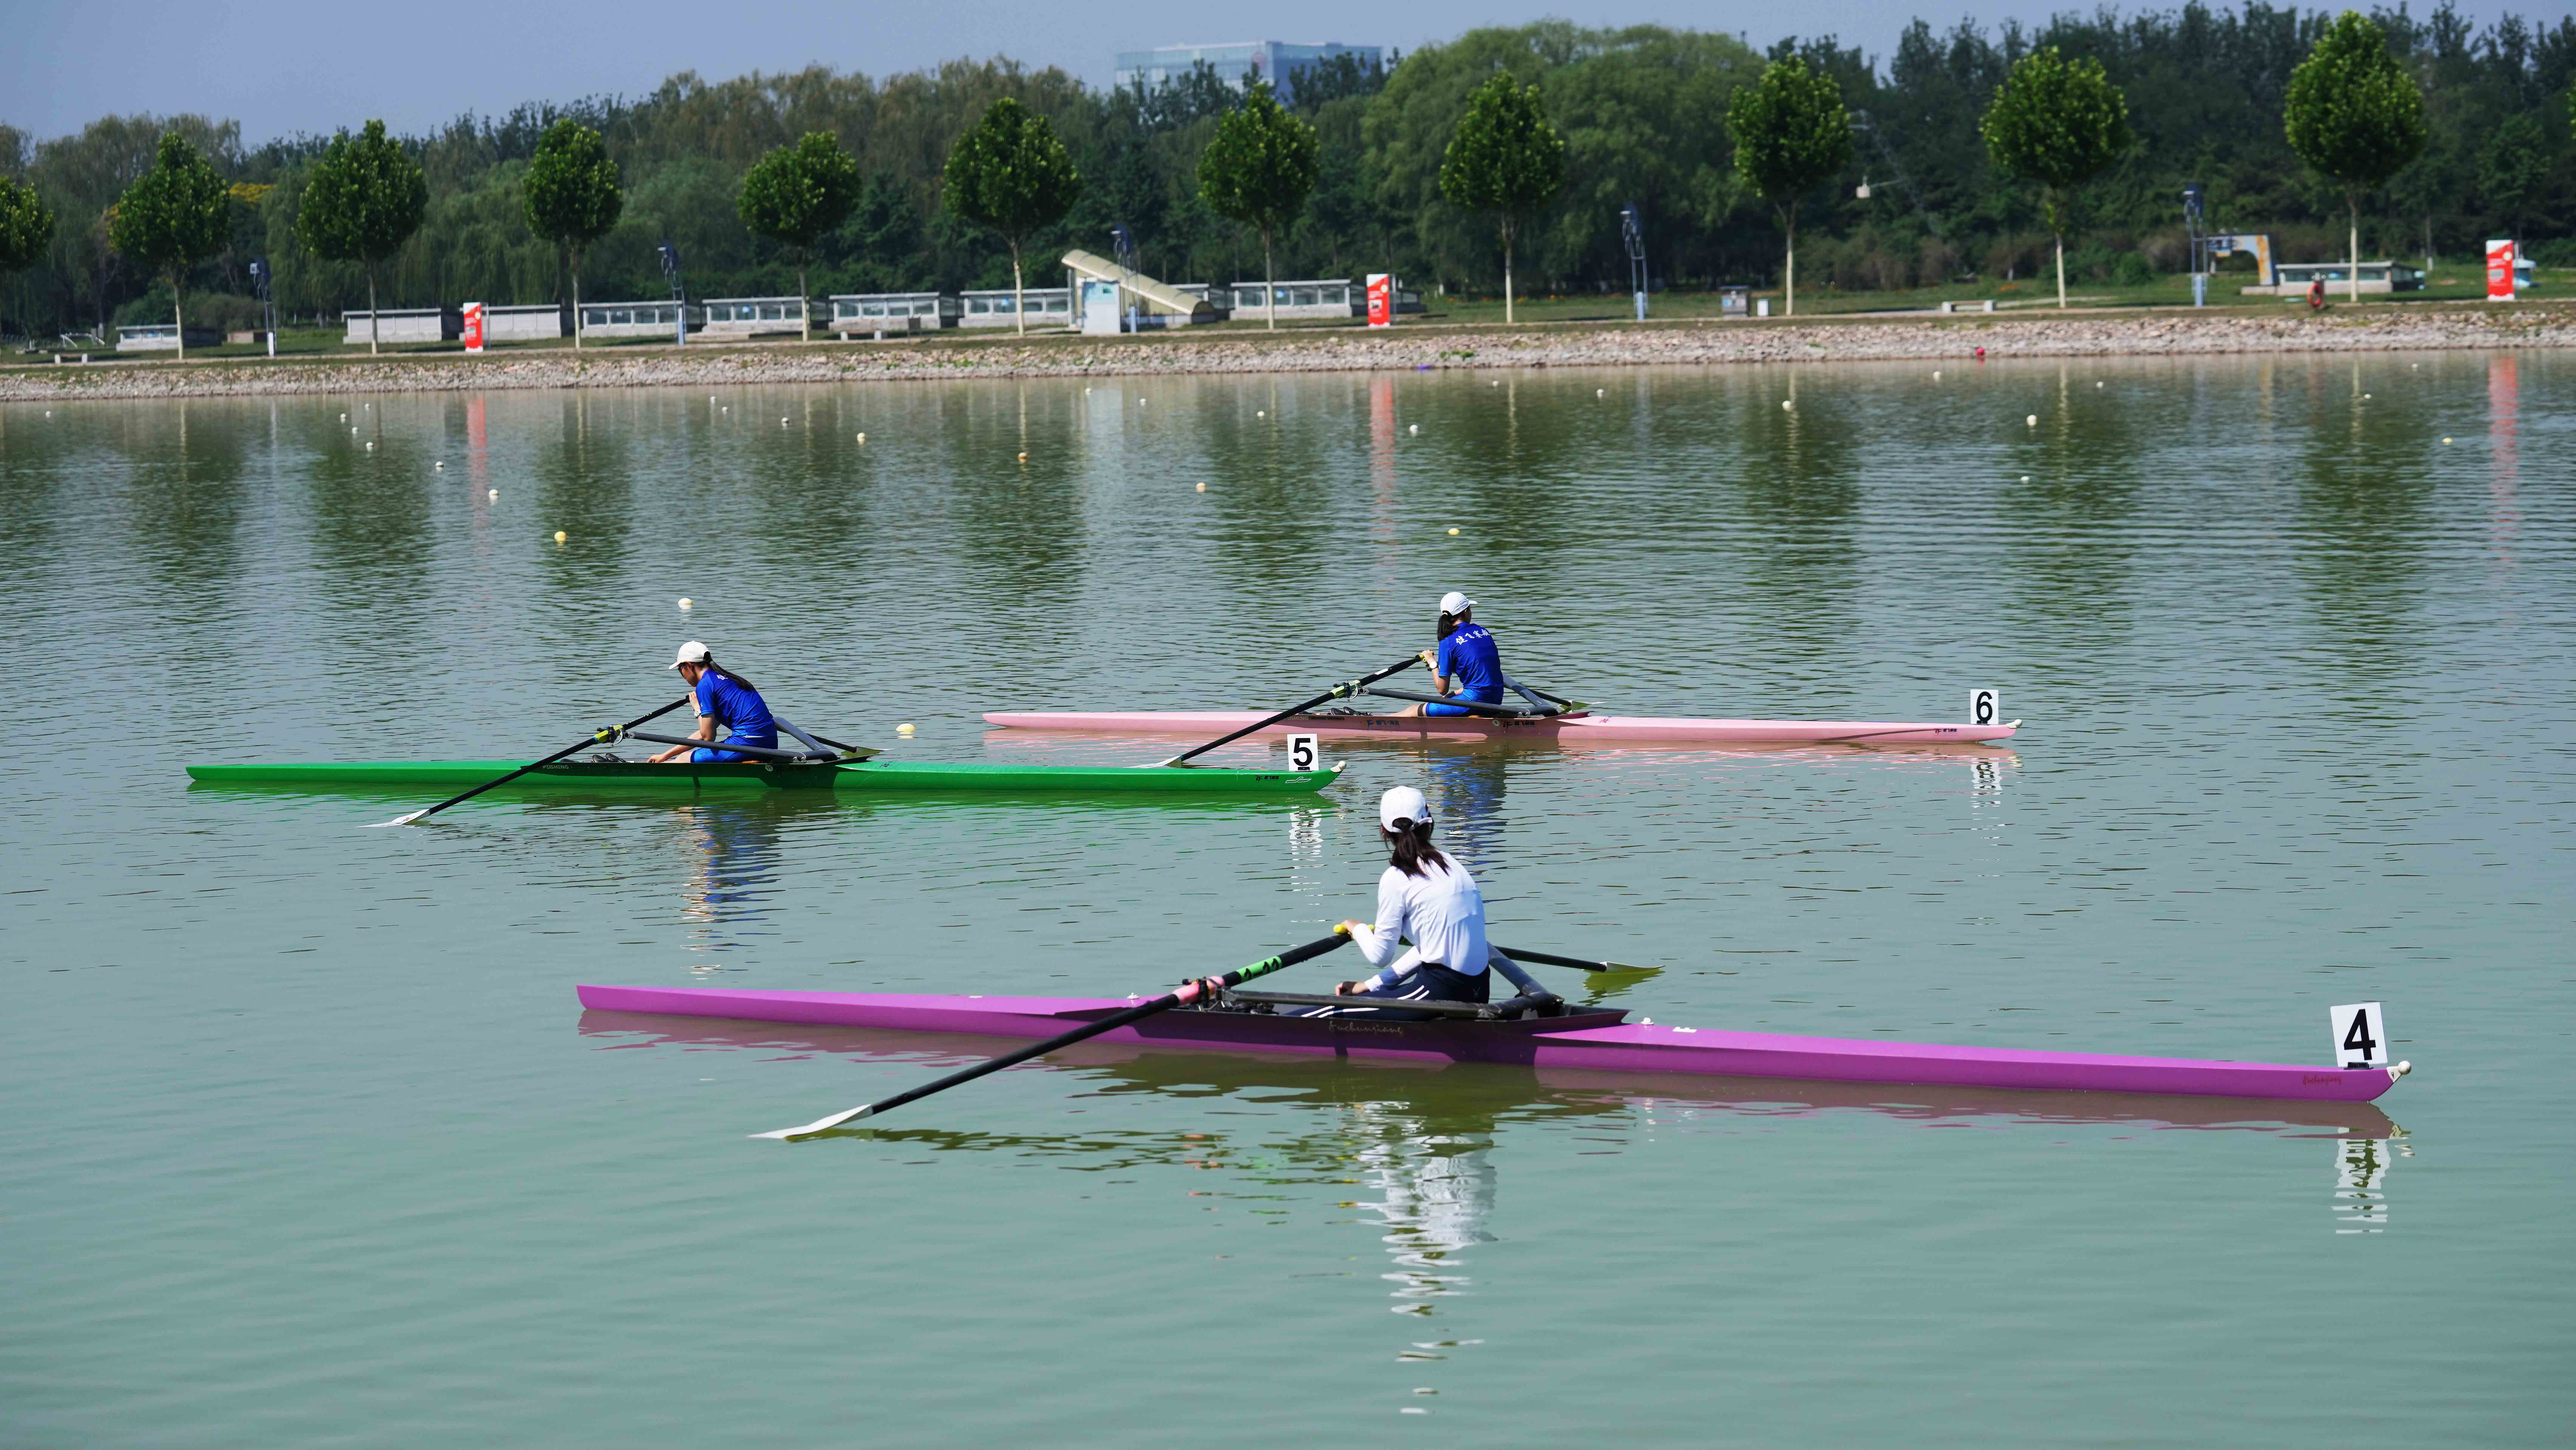 About 500 rowing lovers participate in a rowing event in Beijing